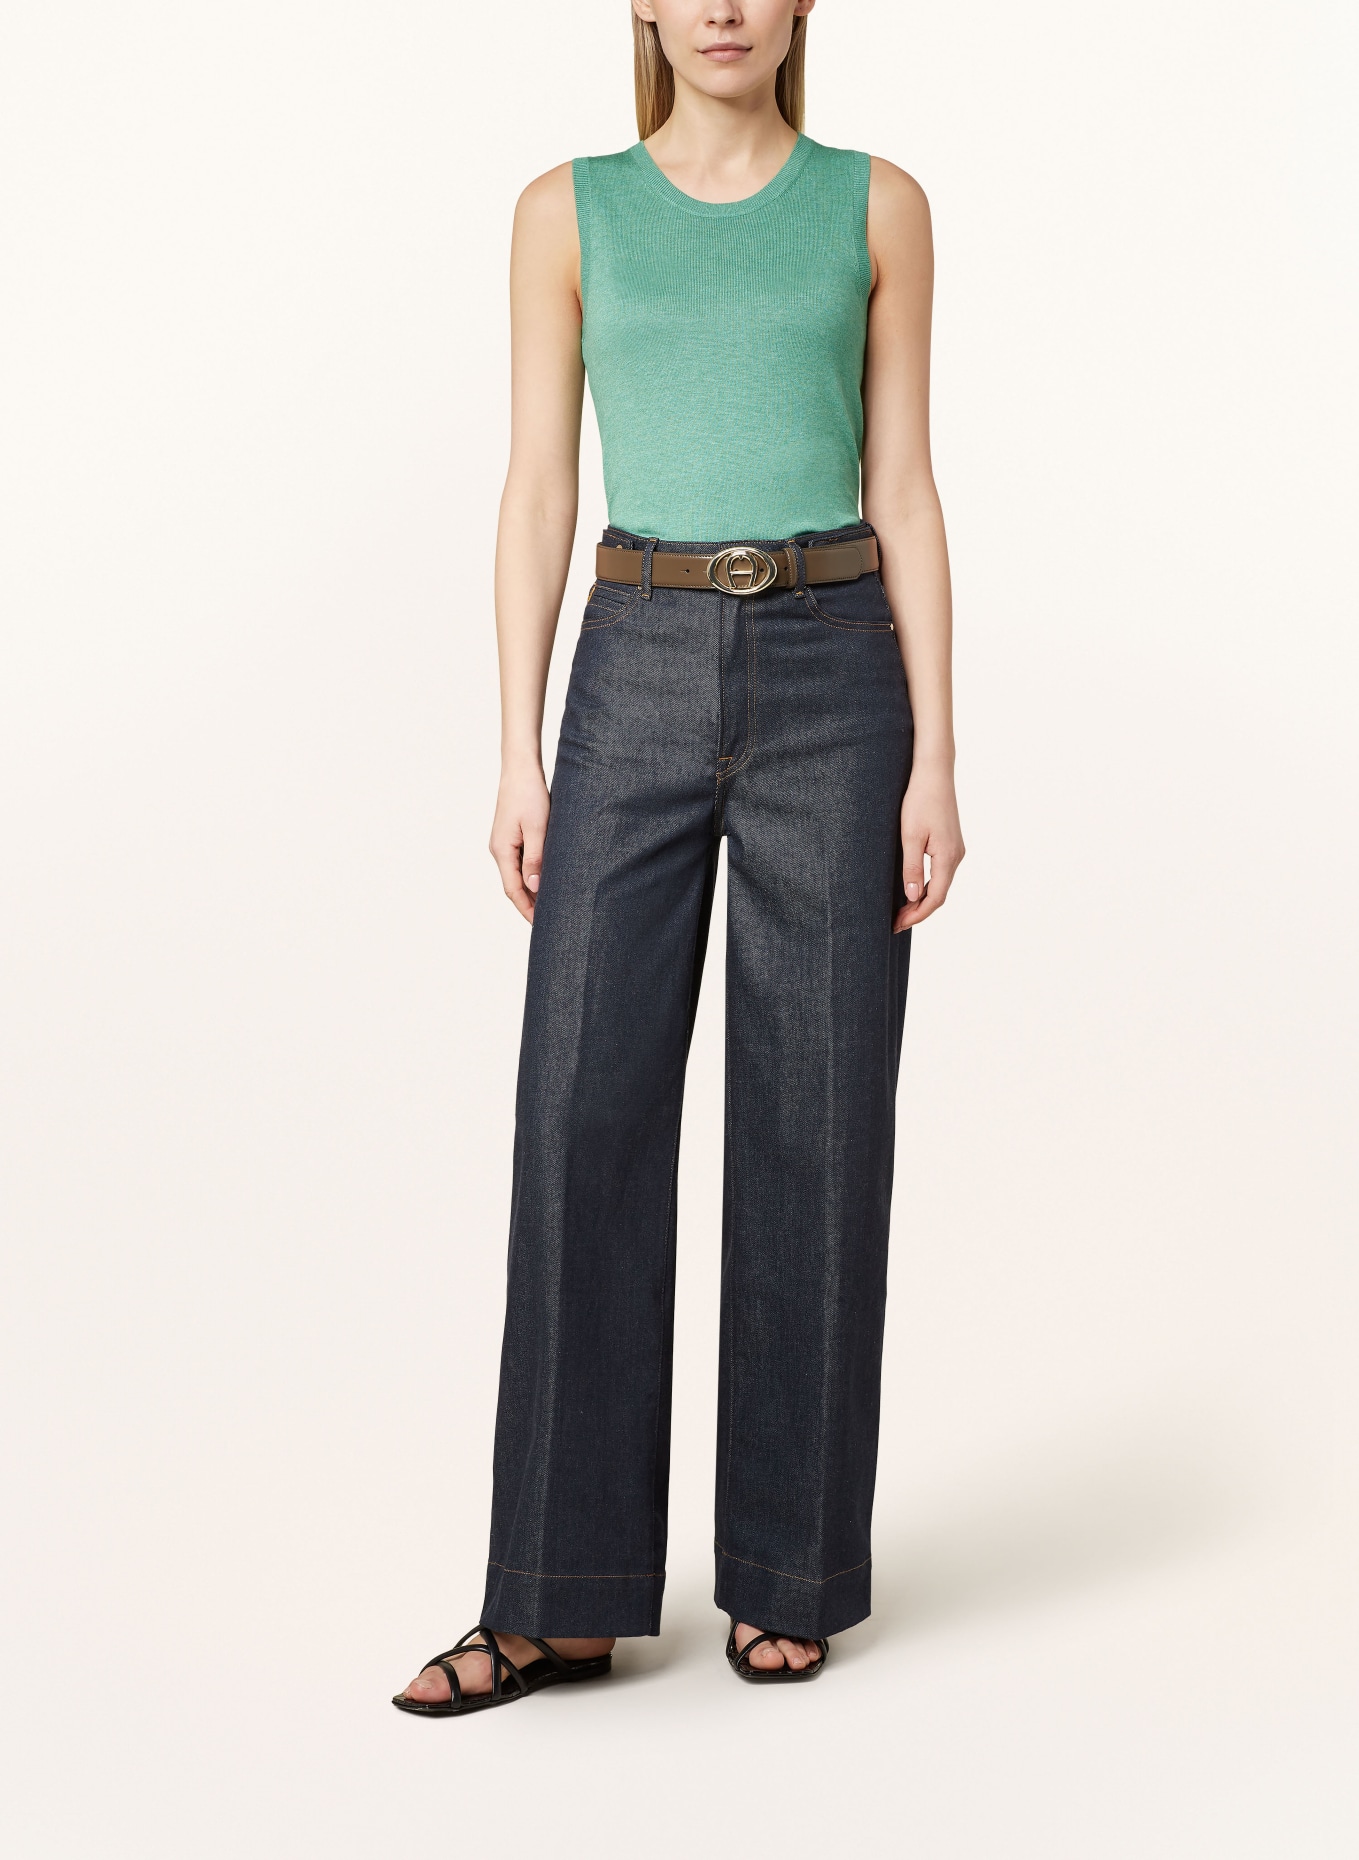 REPEAT Knit top, Color: GREEN (Image 2)